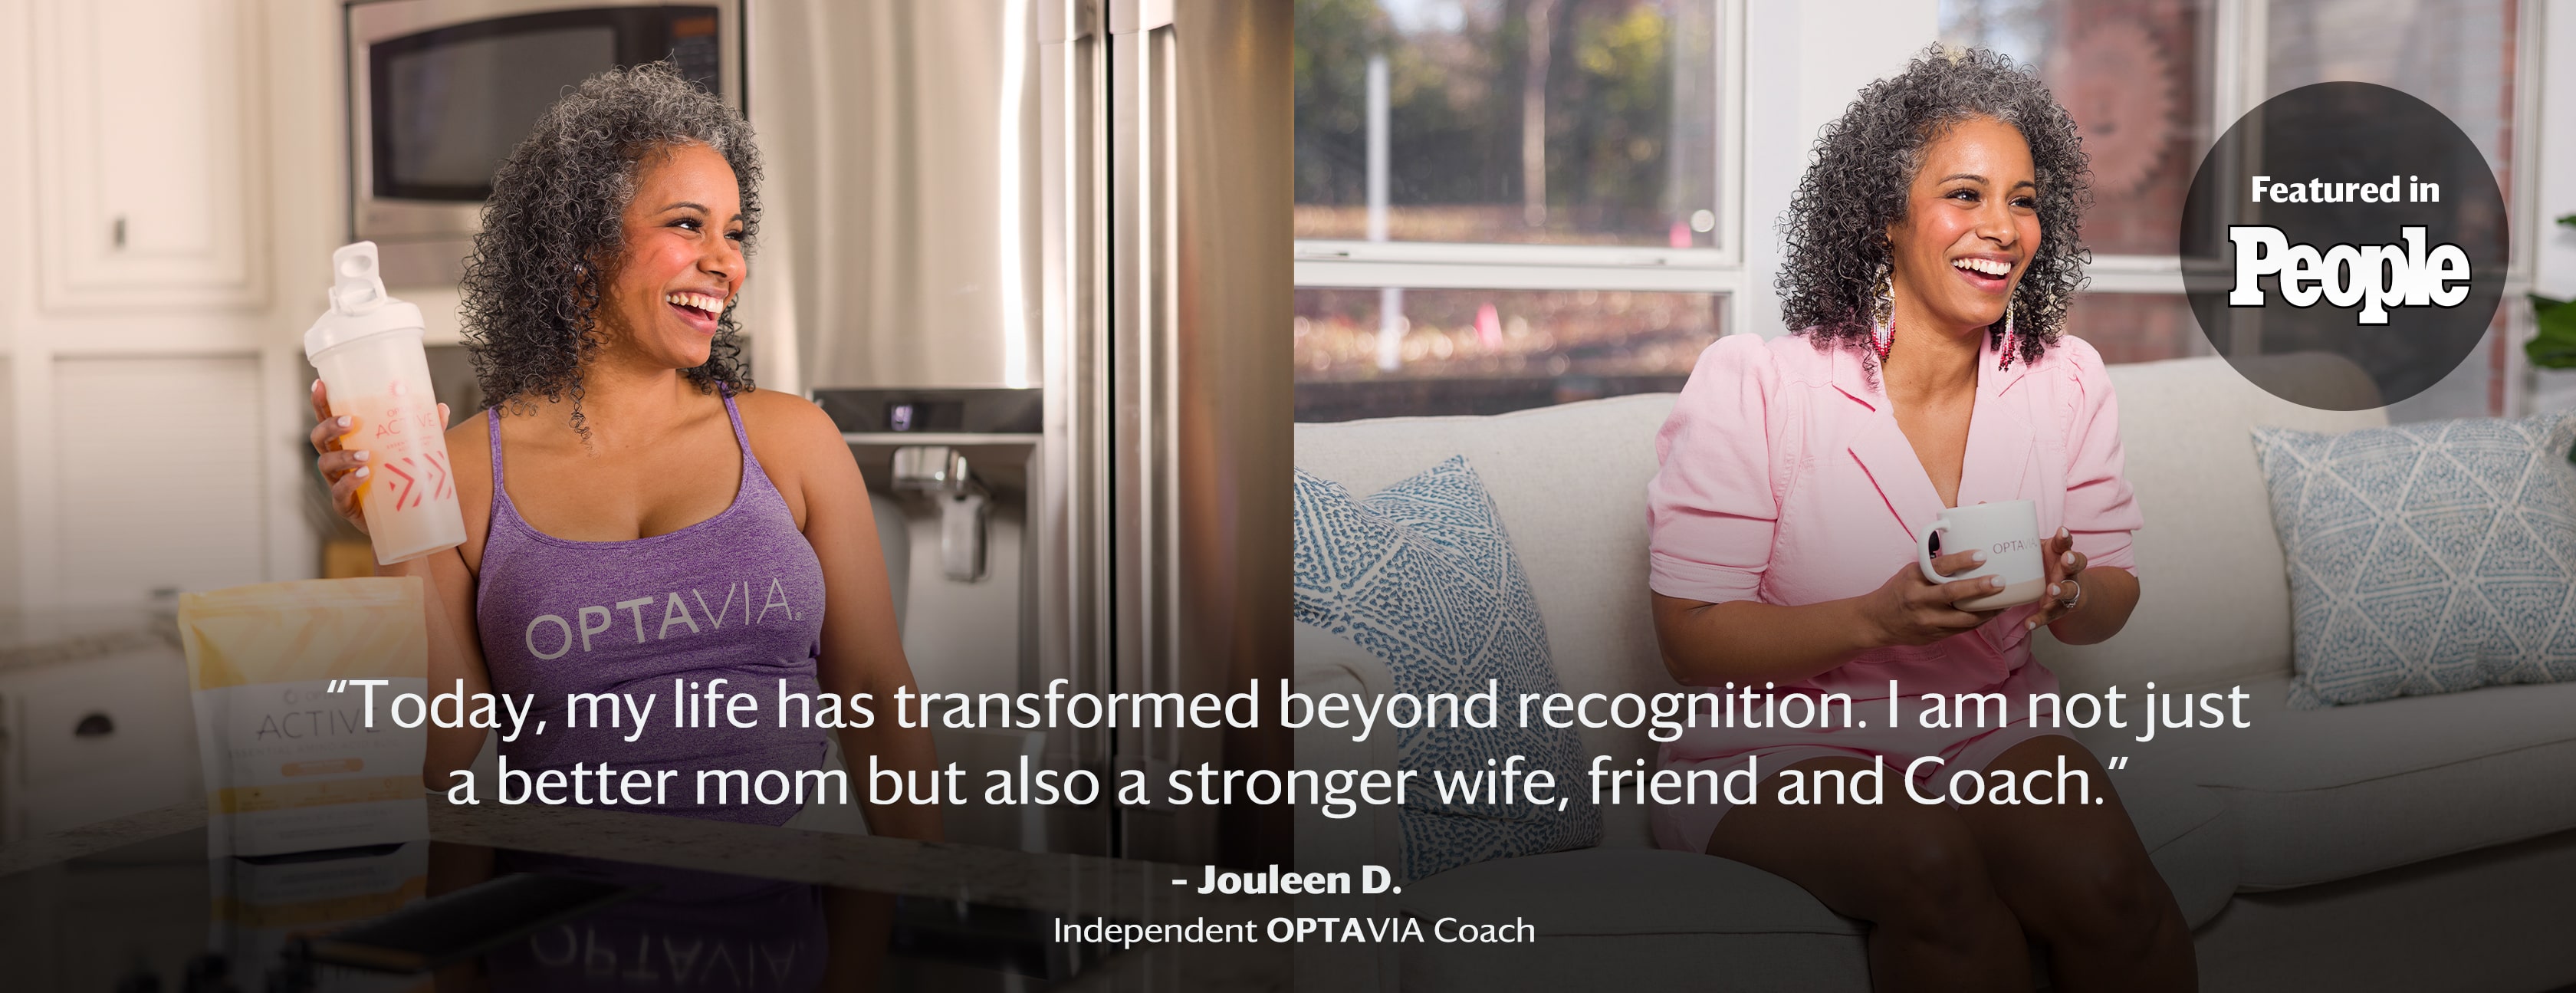 Today, my life has transformed beyond recognition. I am not just a better mom but also a stronger wife, friend and coach. Jouleen D., Independent Optavia Coach.